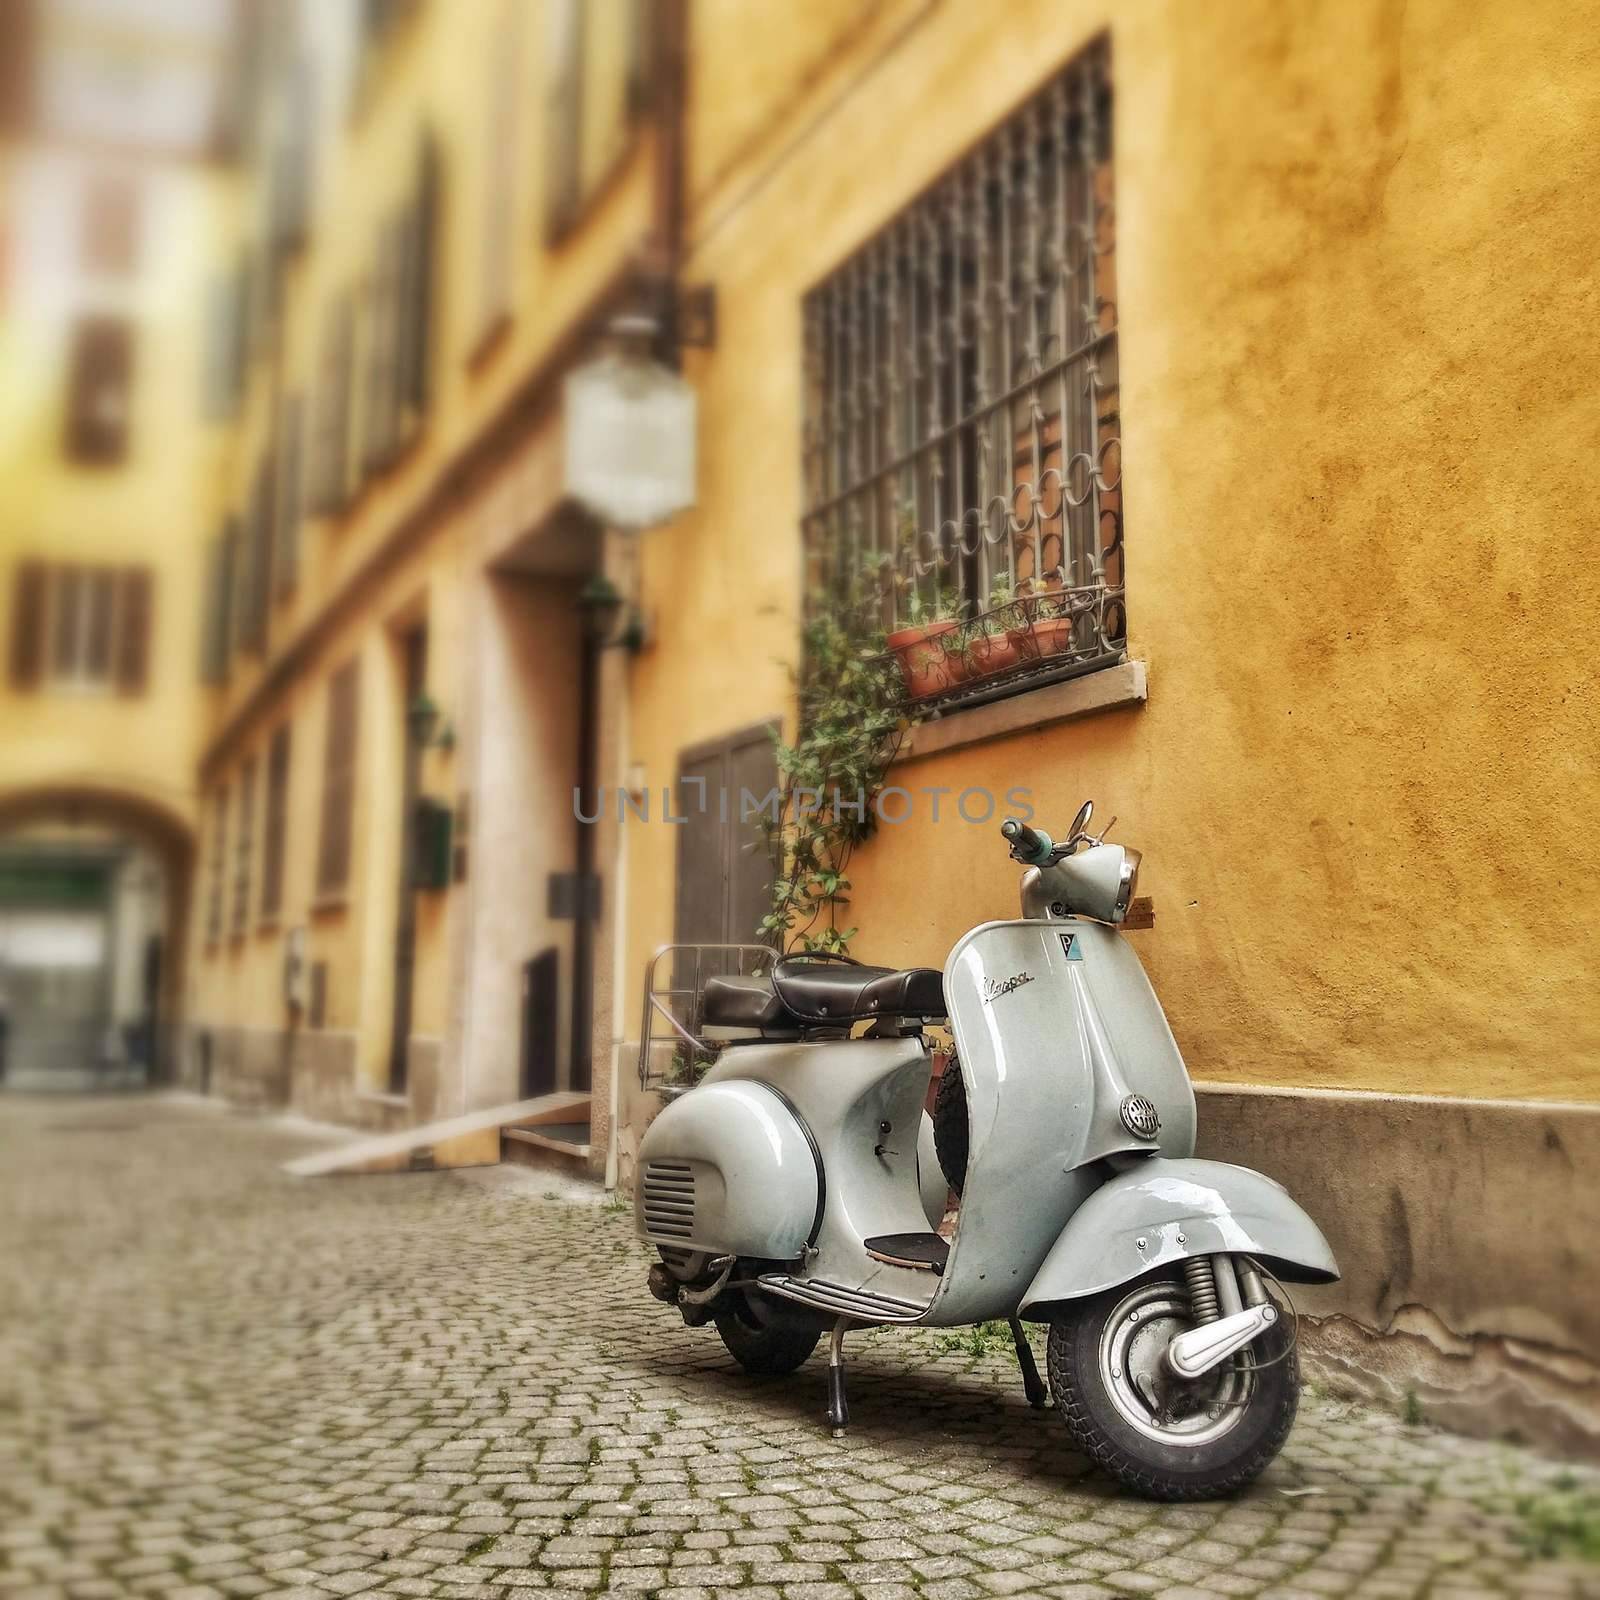 a 60's vespa motorcycle in a typical italian old town alley.